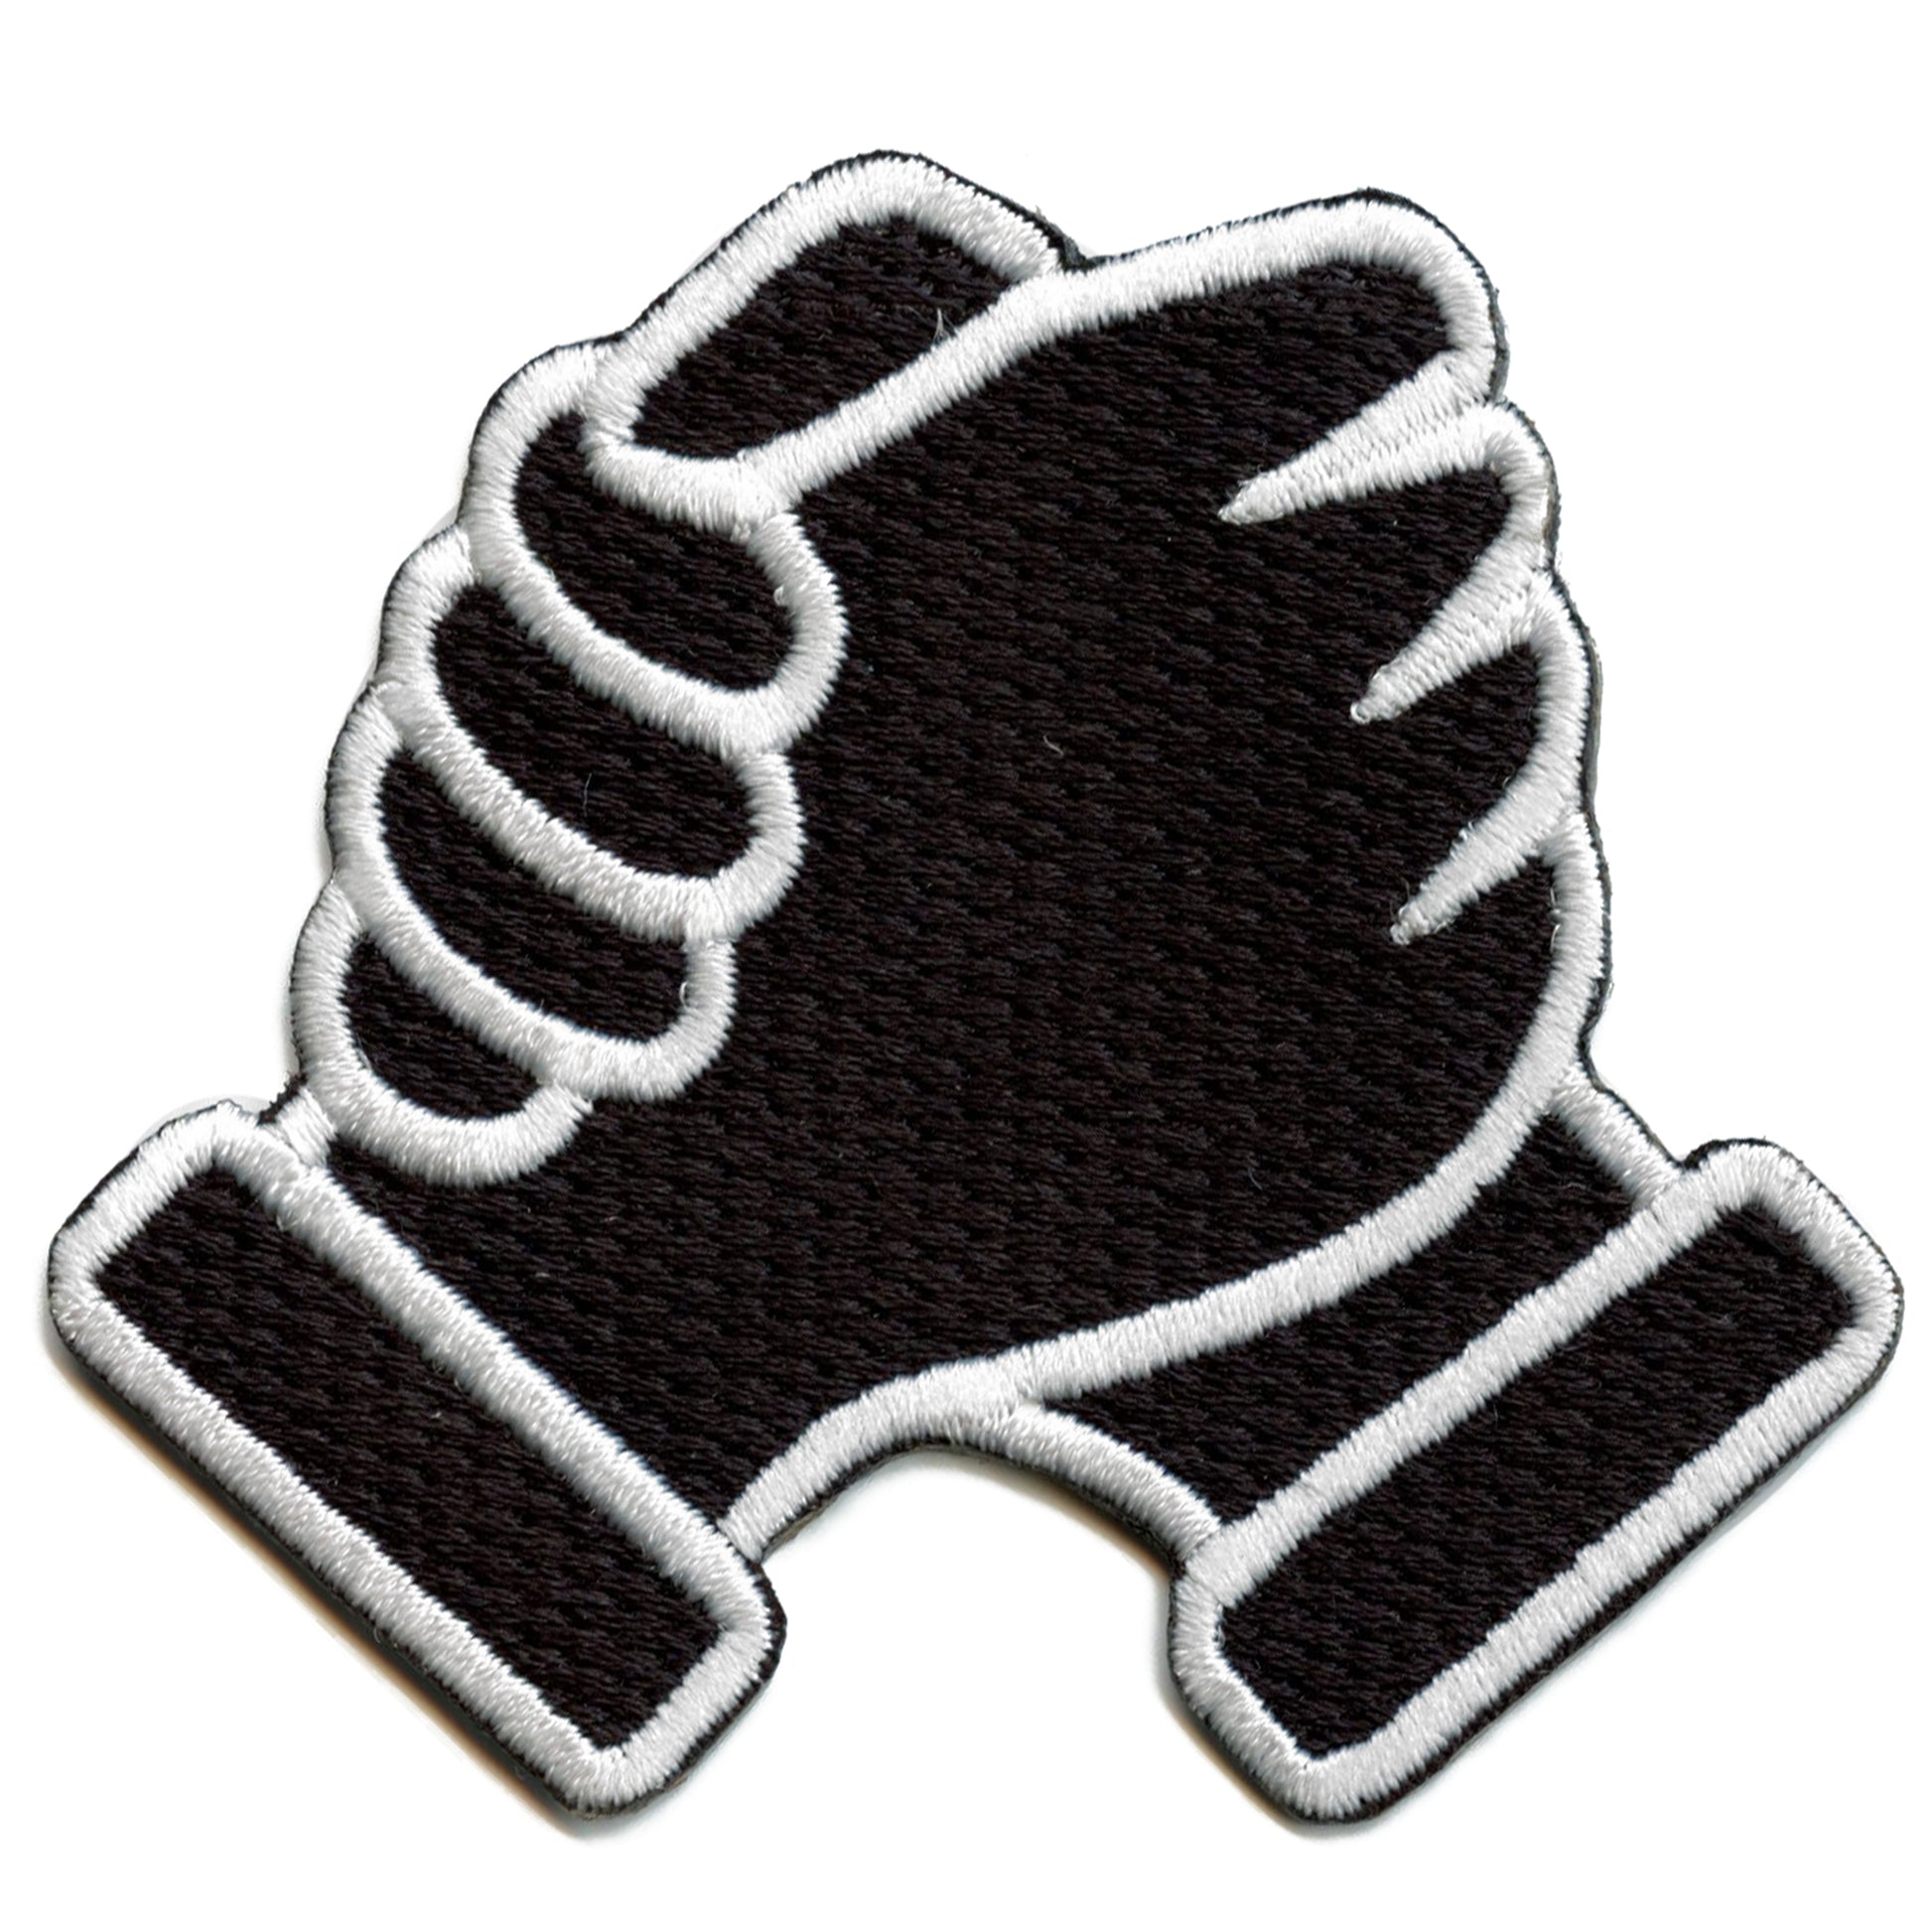 Homie Hands Handshake Black Emoji Iron on Patch – Patch Collection